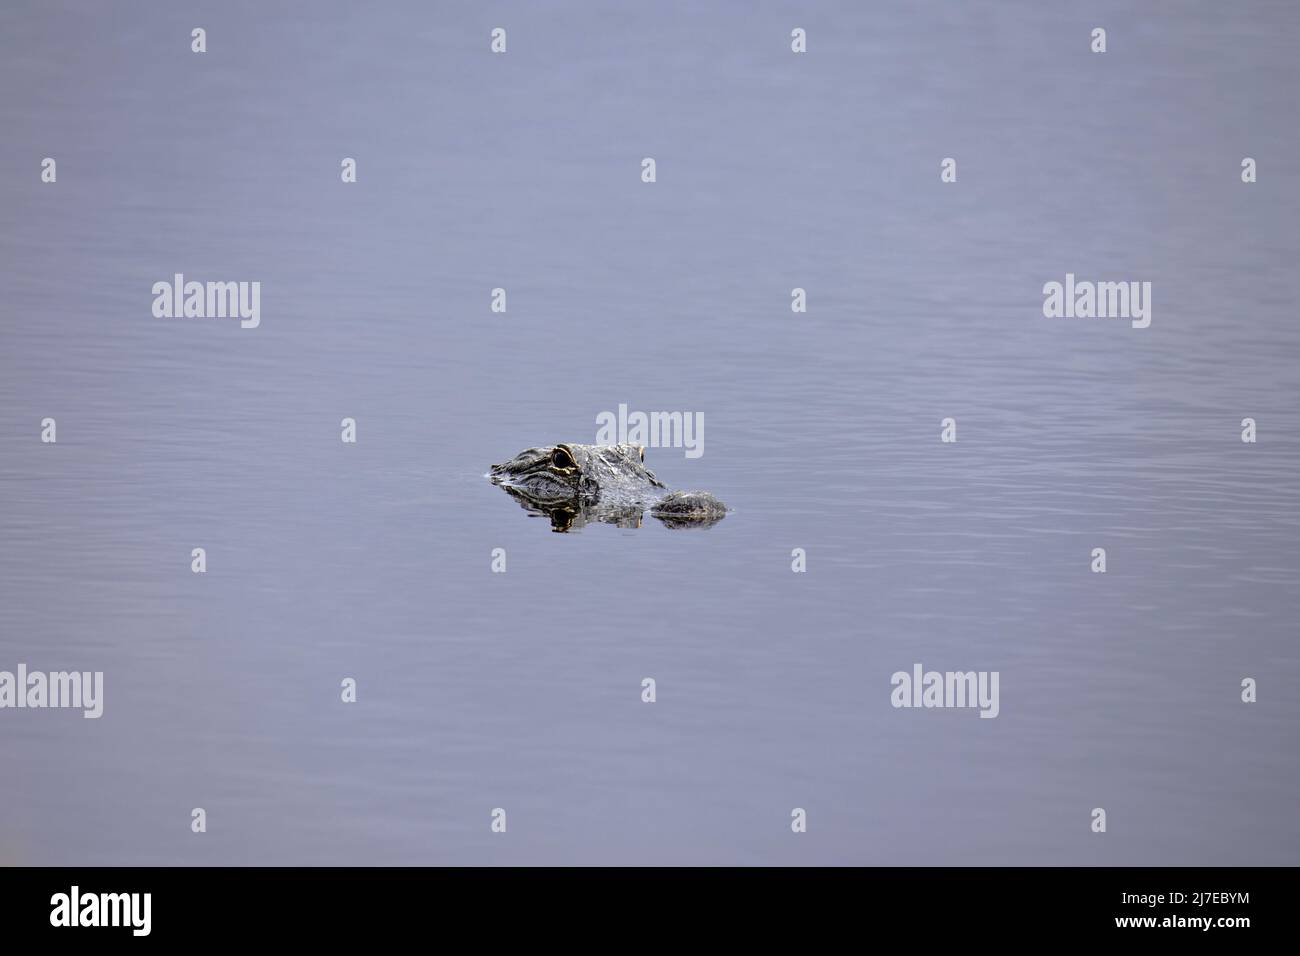 Florida Gator with its head above the water Stock Photo